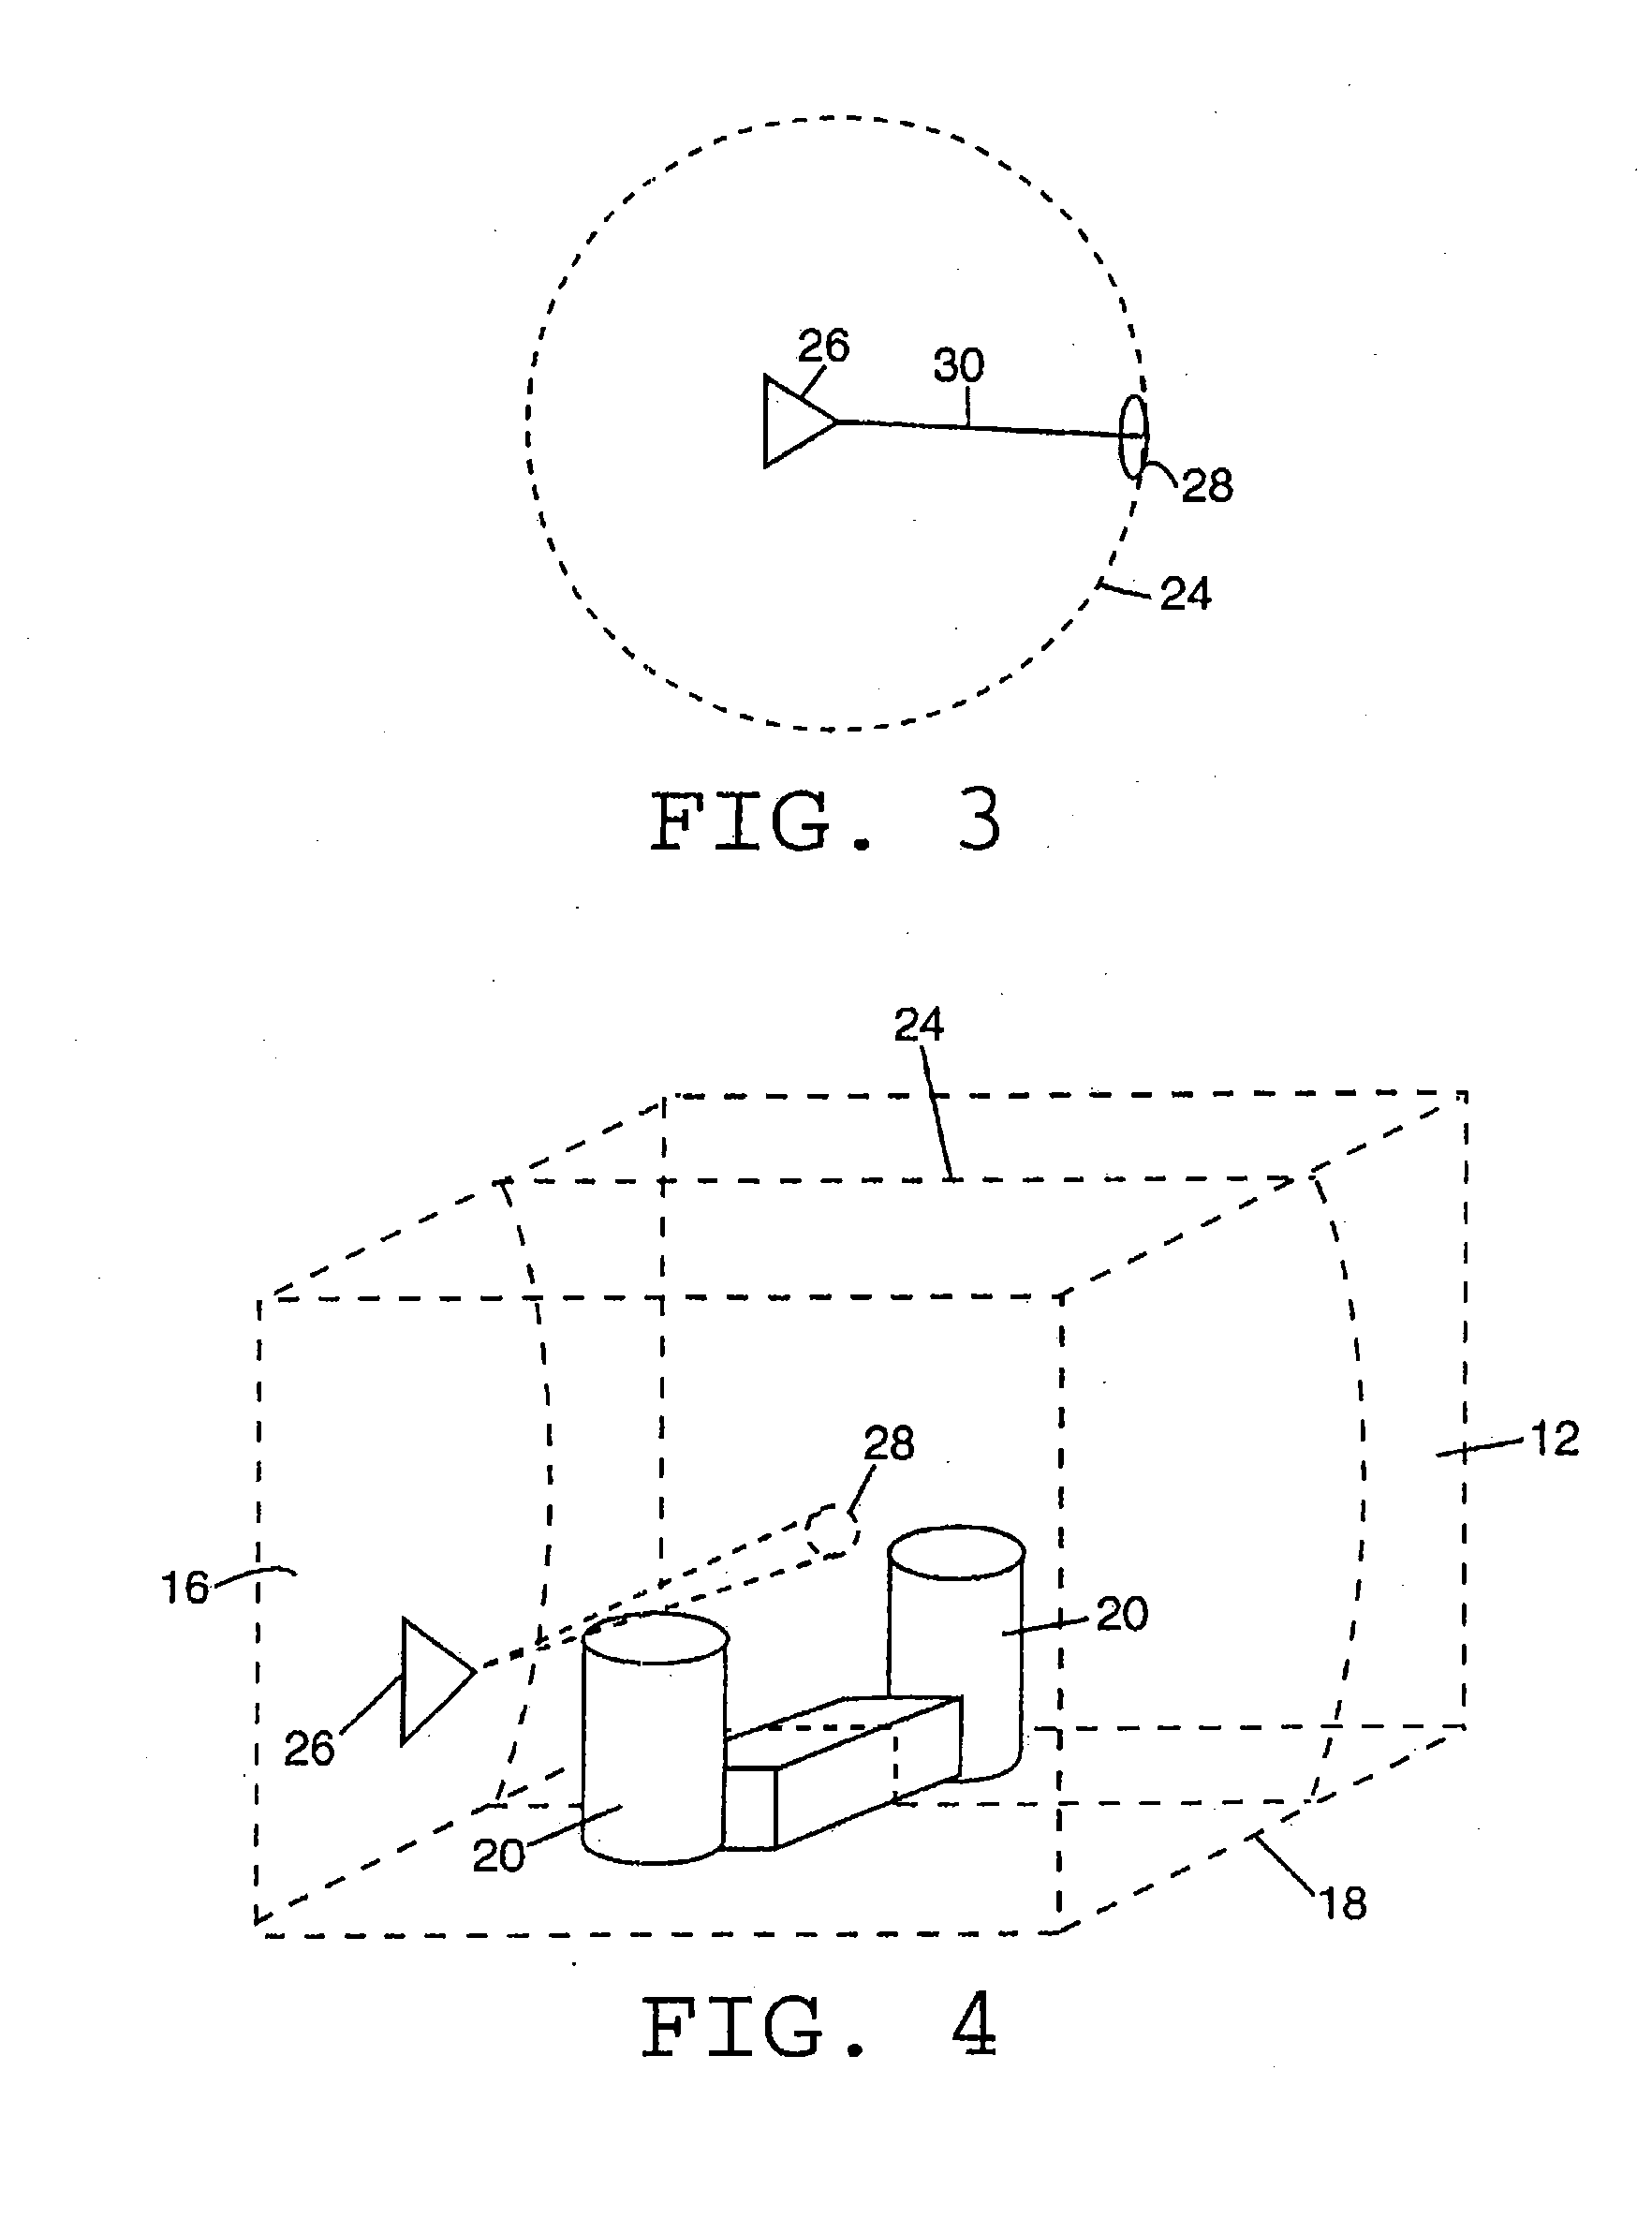 System and Method for Generating Three Dimensional Presentations